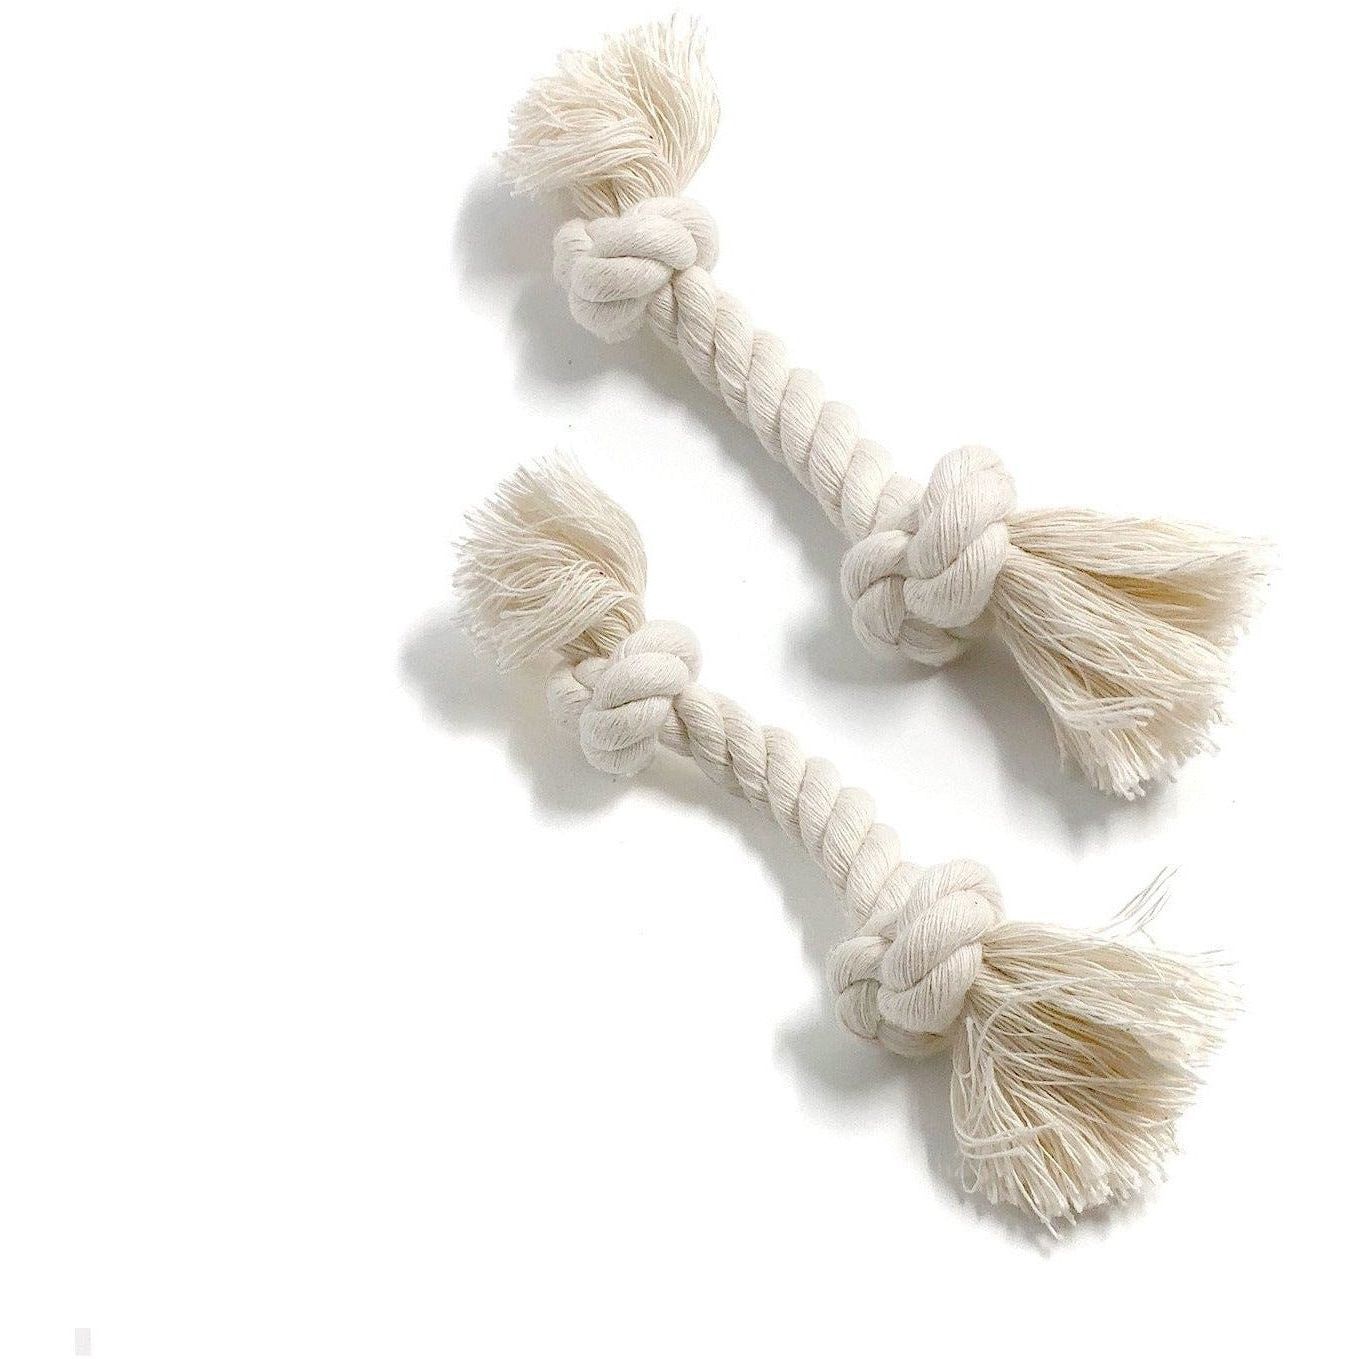 Organic Cotton Dog Rope Toy pets Boba & Vespa Small: 5/8” with 2 knots  